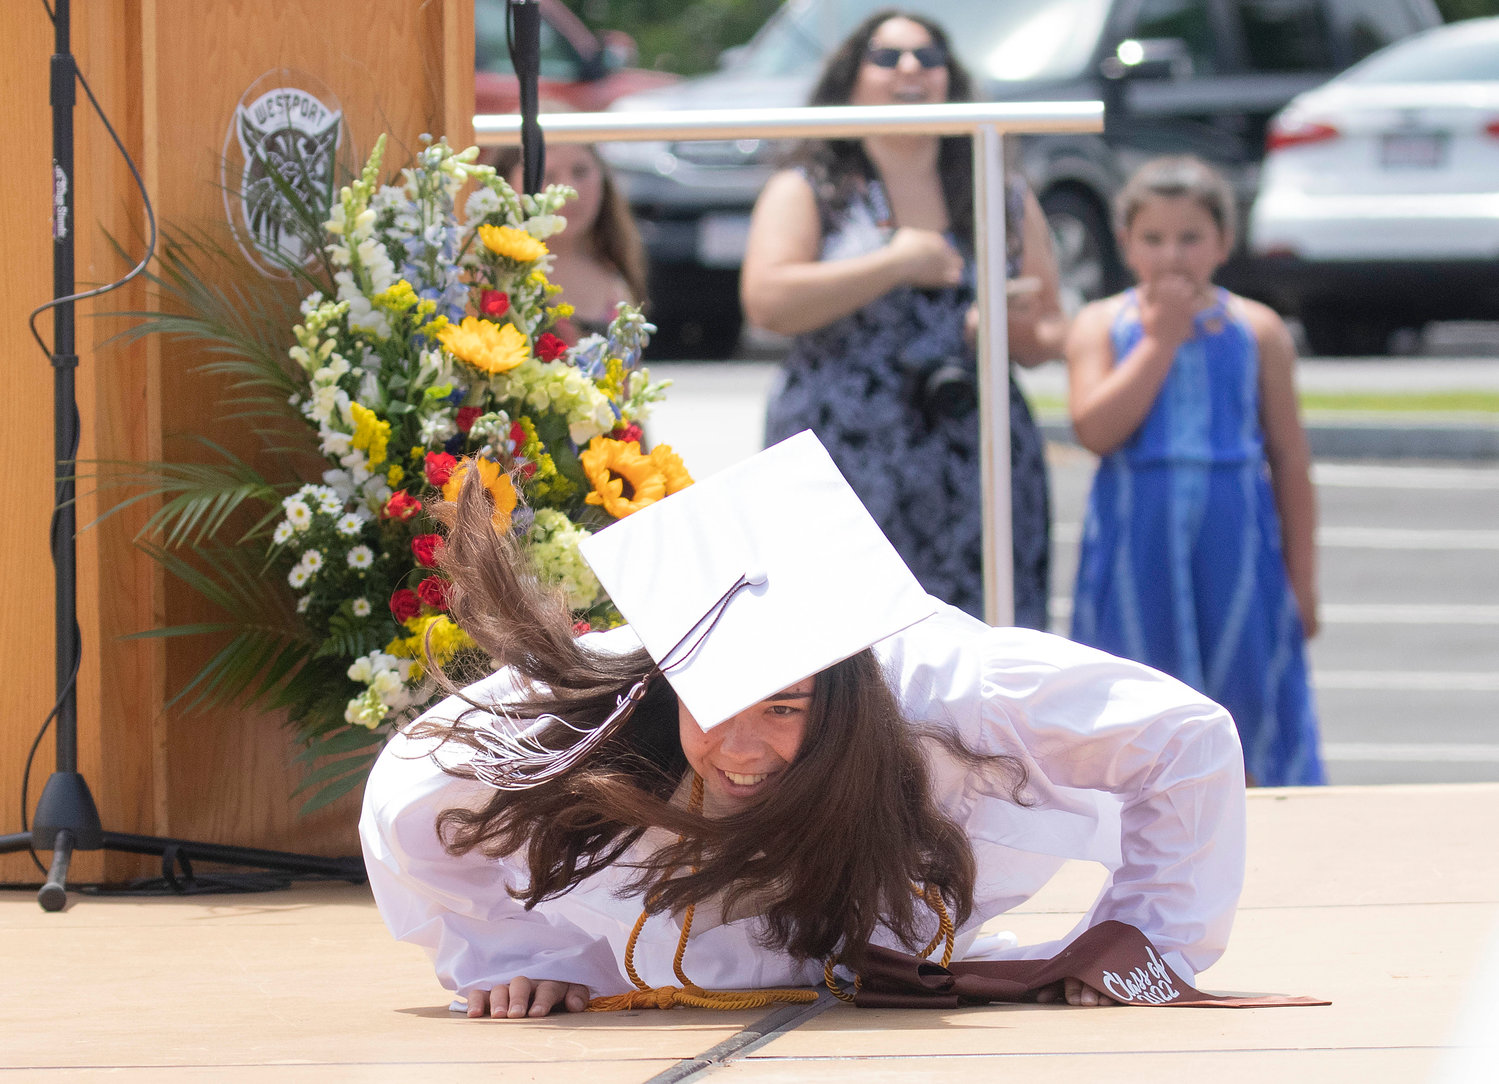 Jesse Skov drops and performs pushups on stage before receiving her diploma. 